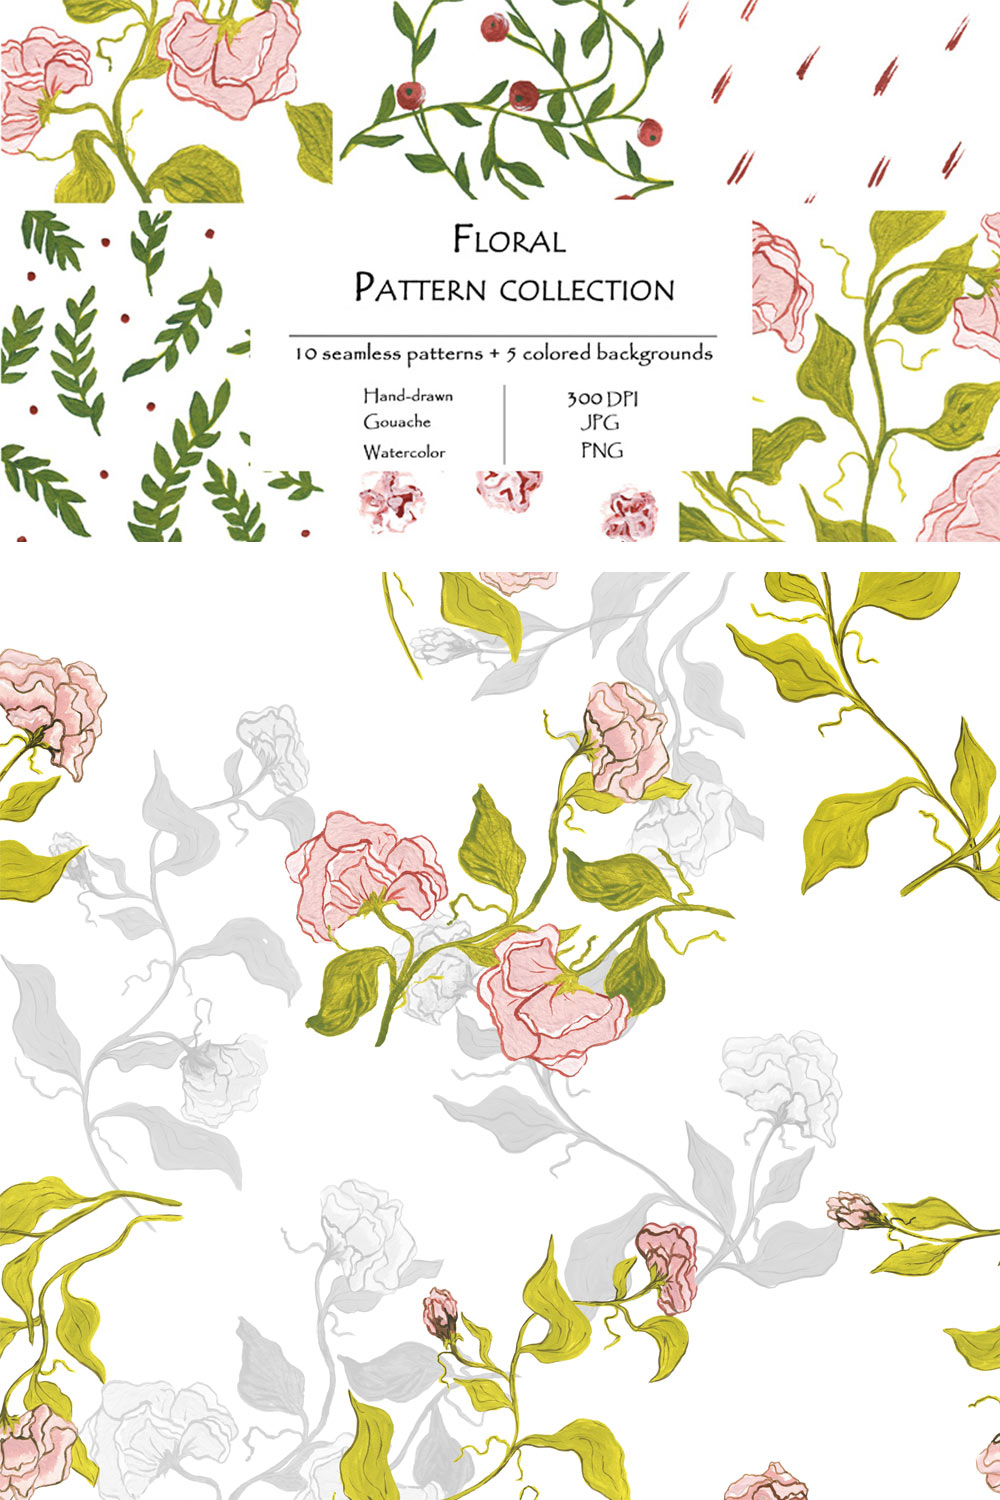 Floral Pattern Collection Of 10 Seamless Patterns And 5 Colored Backgrounds Pinterest Image.